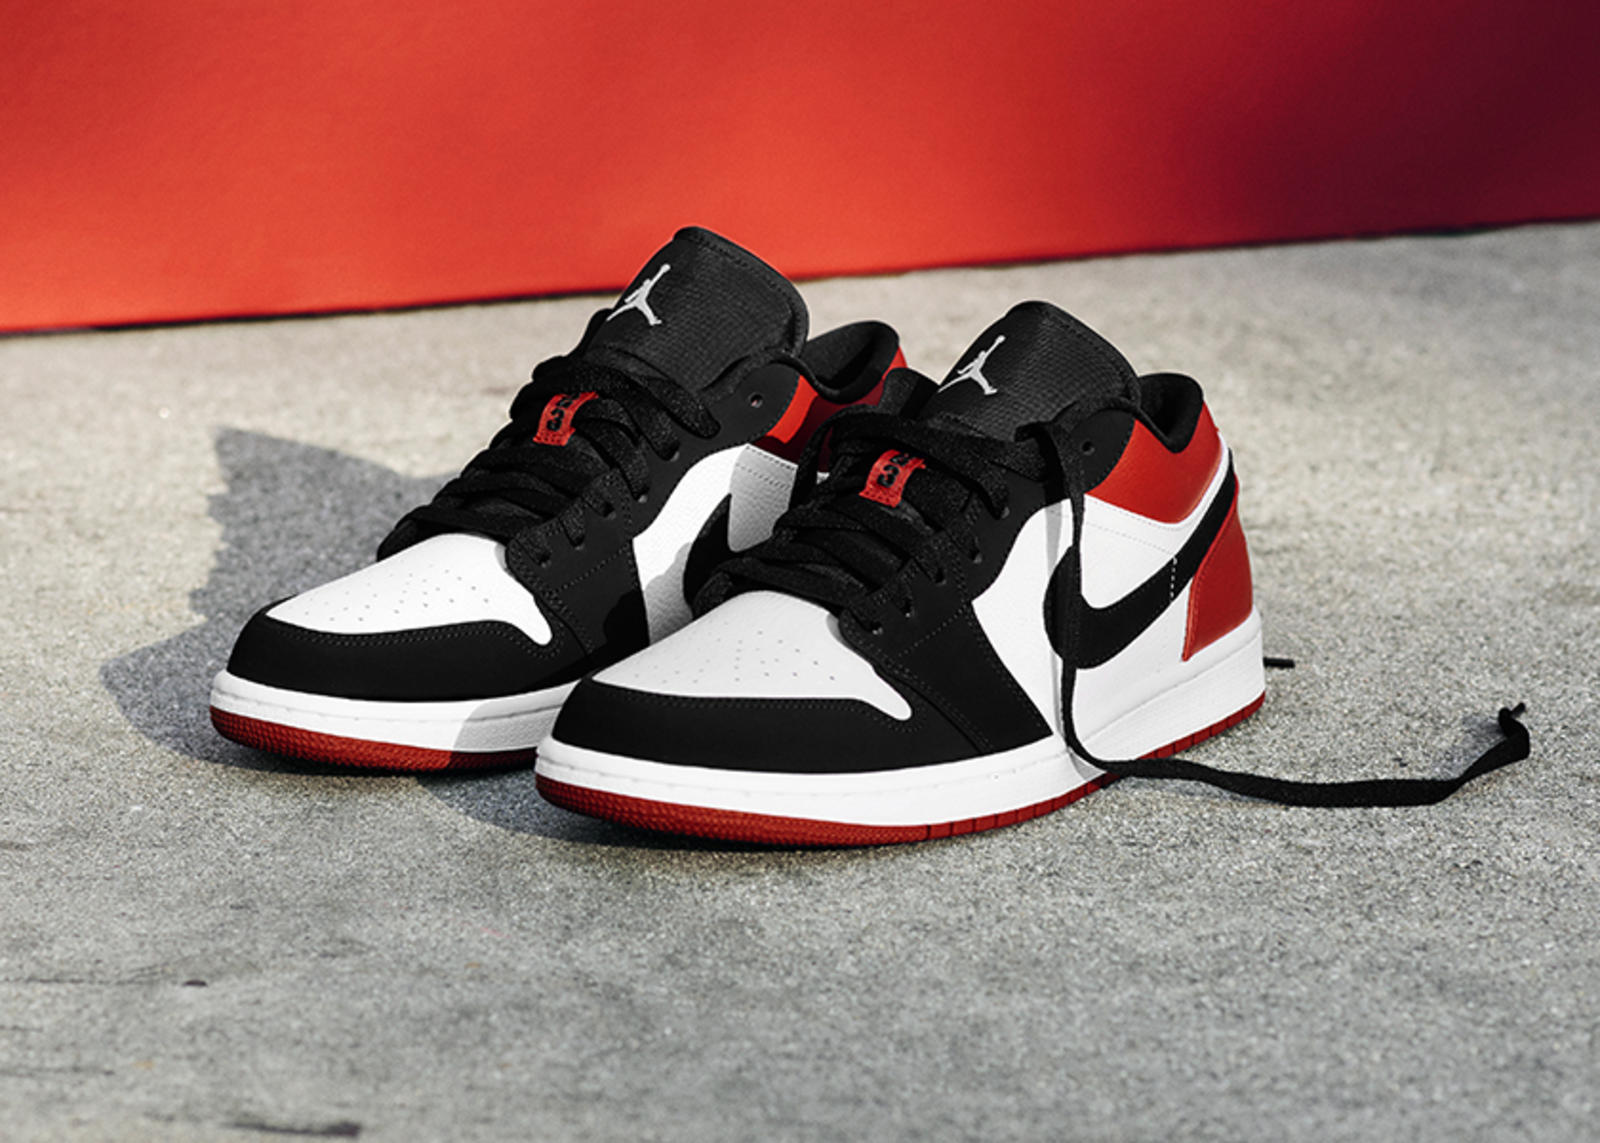 Nike Announces Official Release Date for Air Jordan 1 and Nike SB